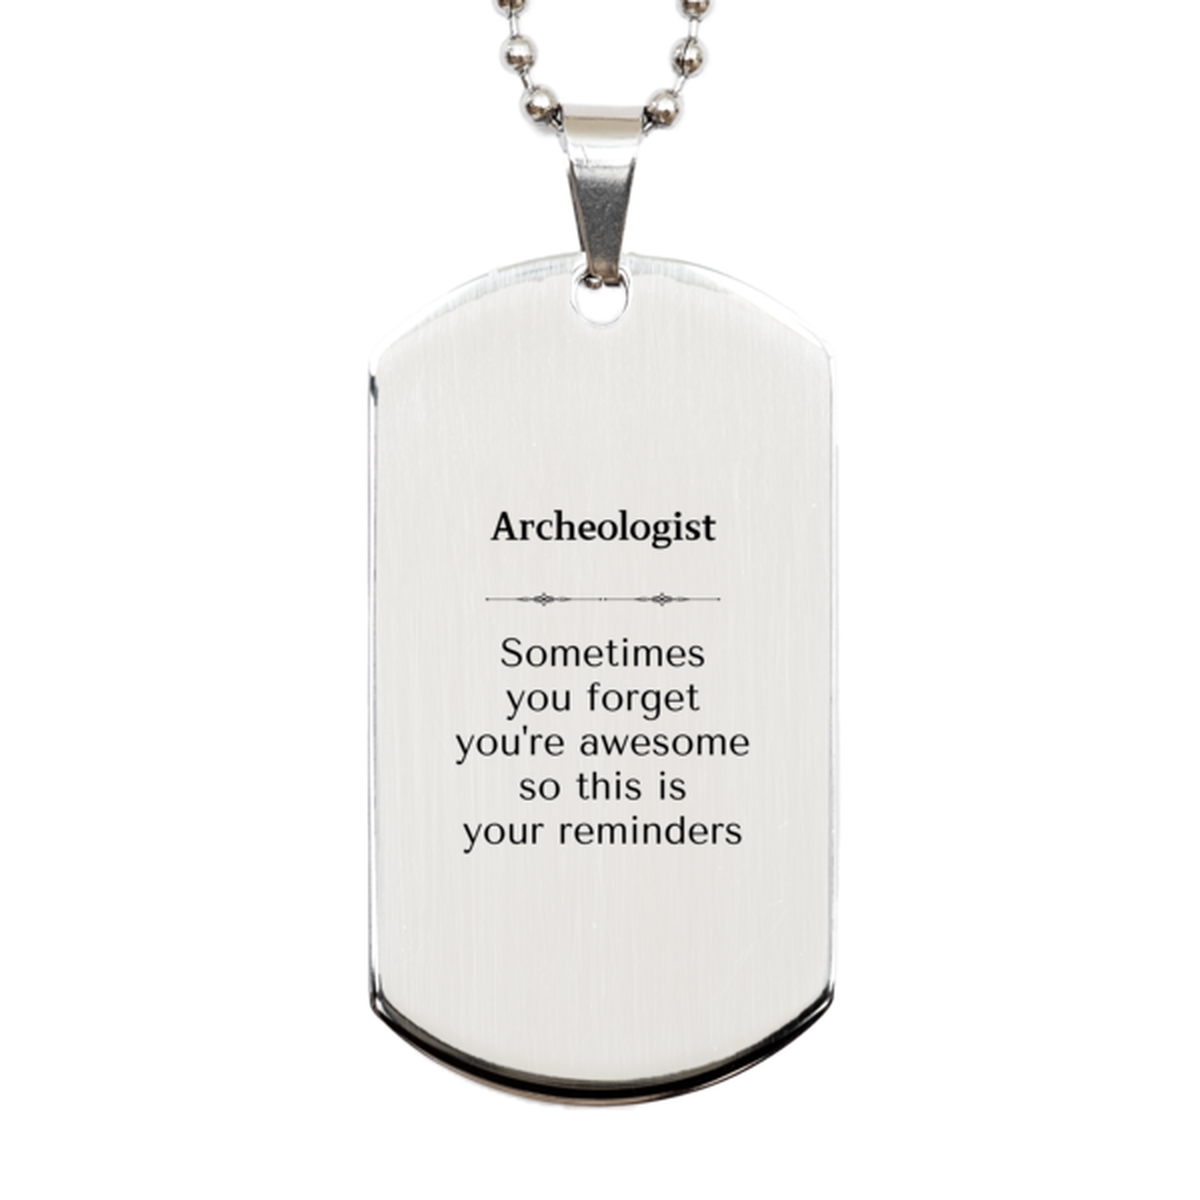 Sentimental Archeologist Silver Dog Tag, Archeologist Sometimes you forget you're awesome so this is your reminders, Graduation Christmas Birthday Gifts for Archeologist, Men, Women, Coworkers